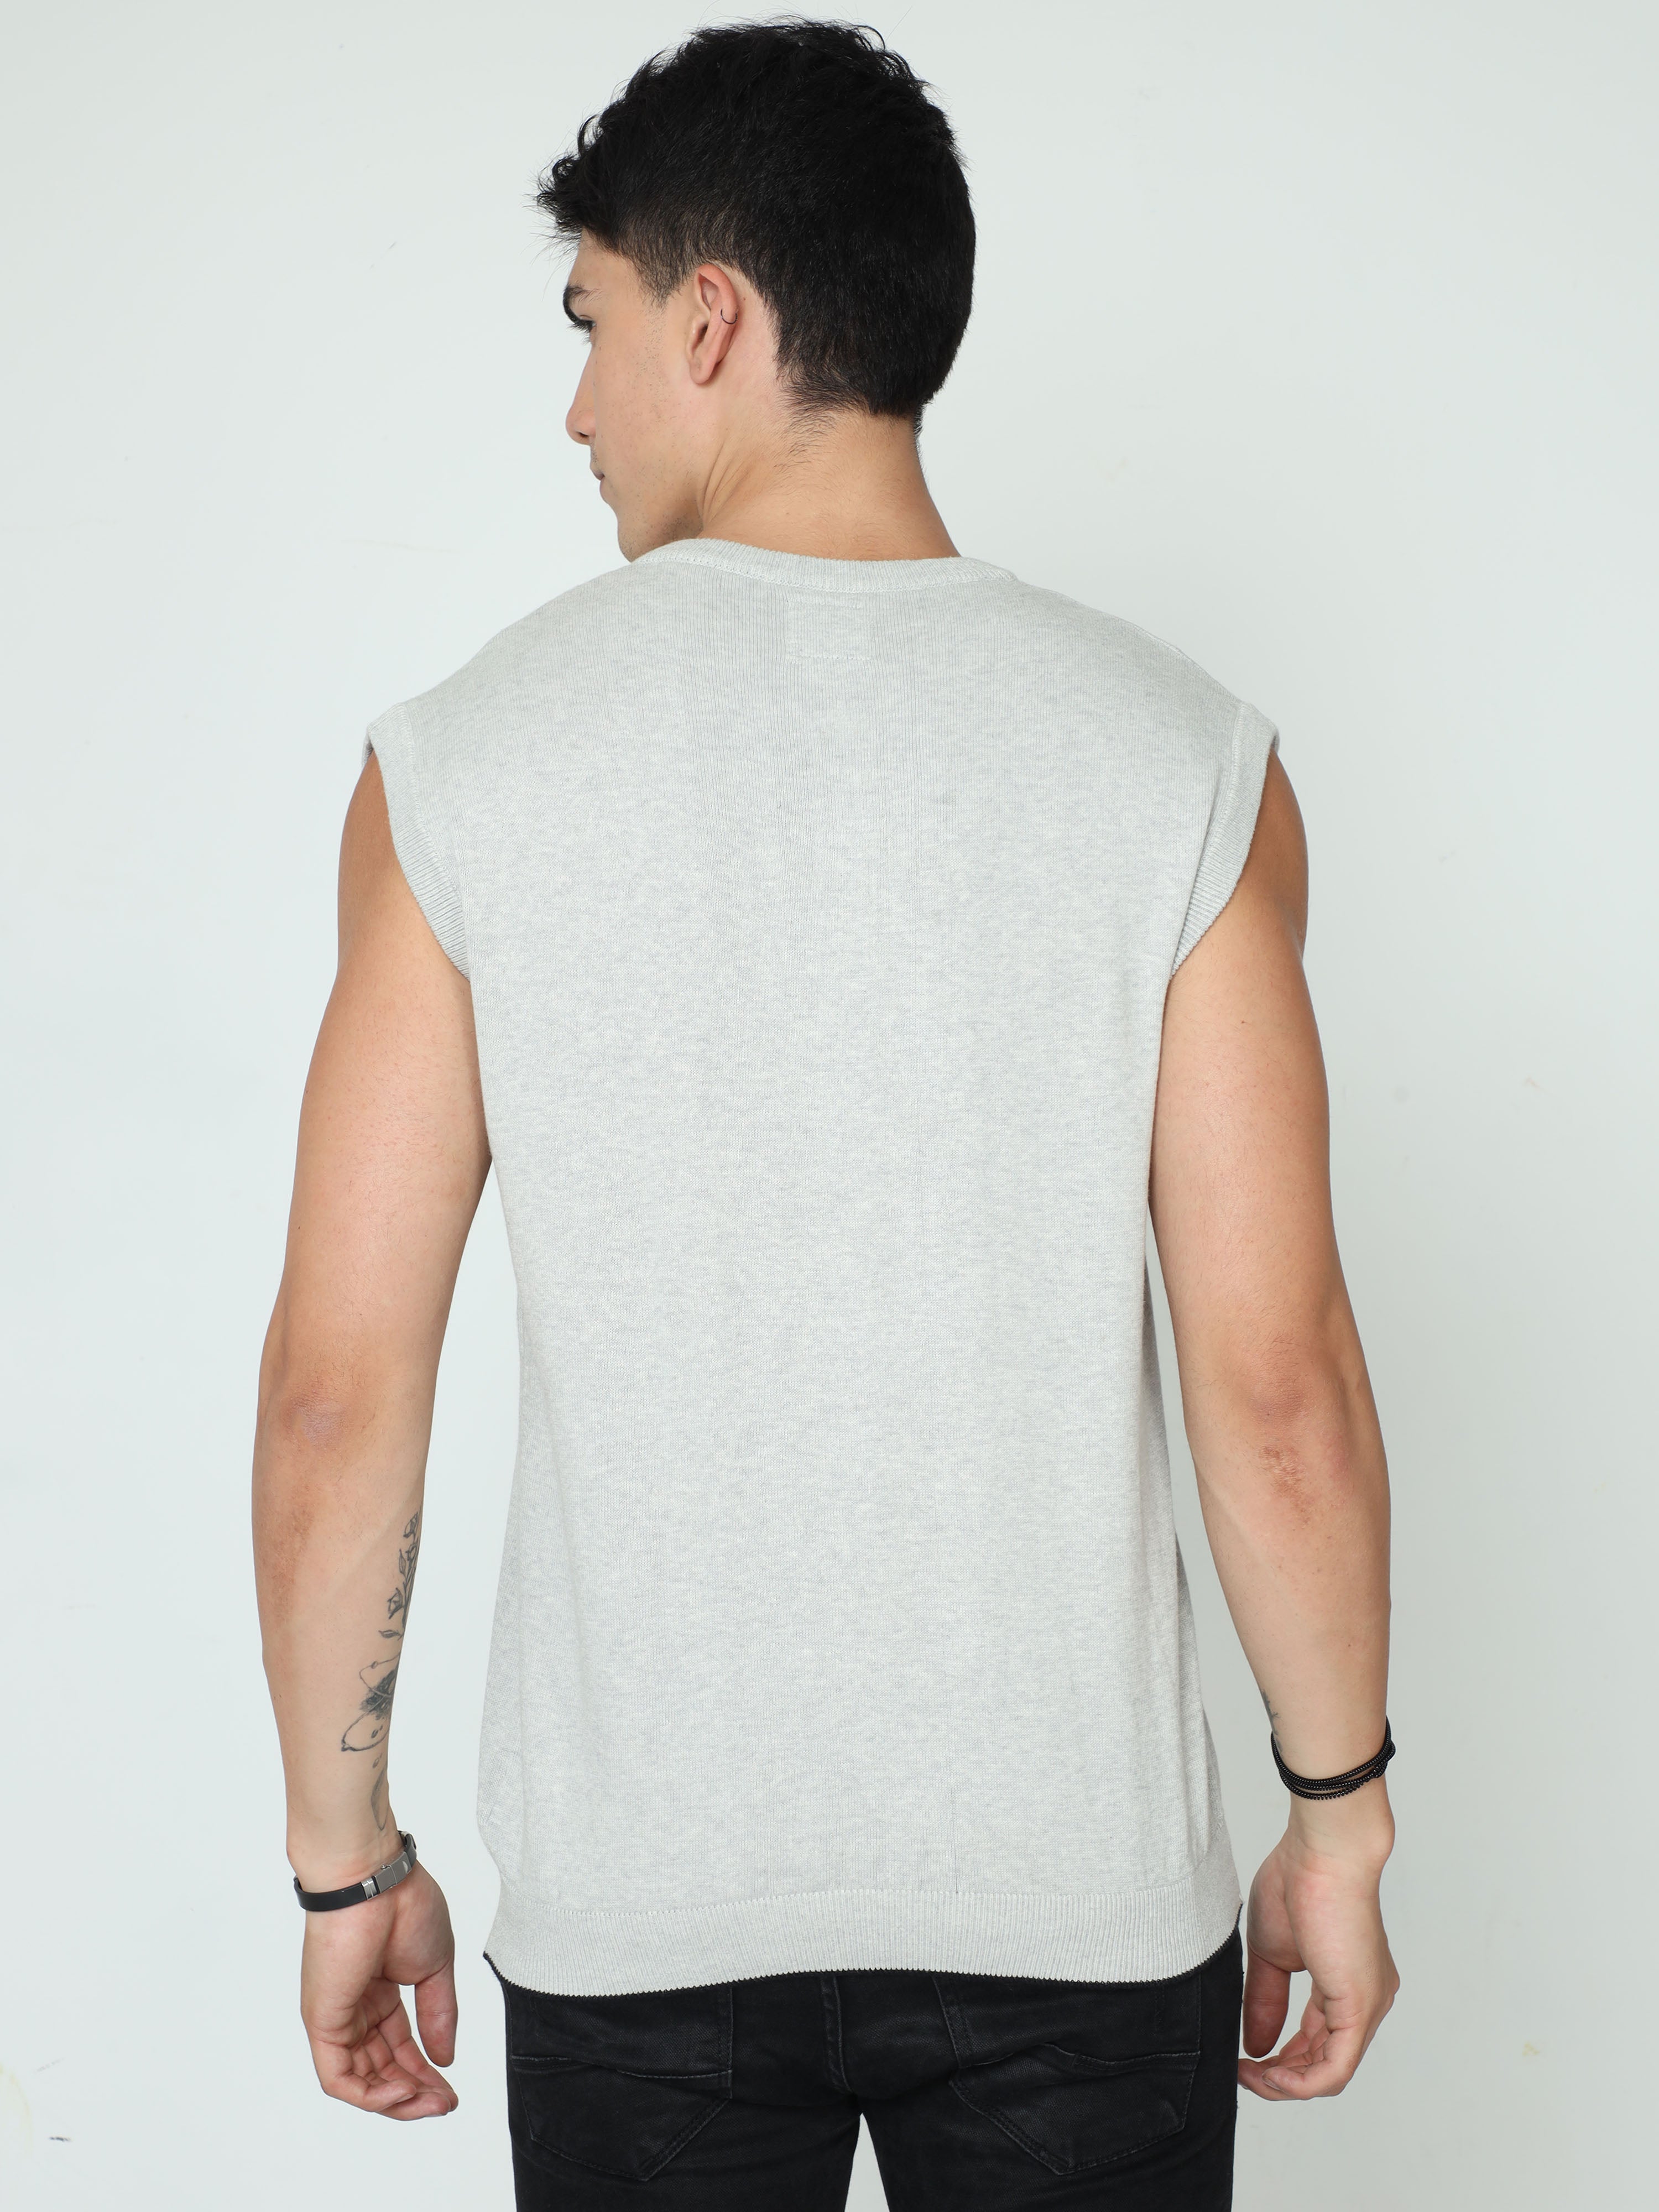 Classic Polo Mens 100% Cotton Grey Solid V Neck Sleeveless Slim Fit Sweater |Cp-Swt-11